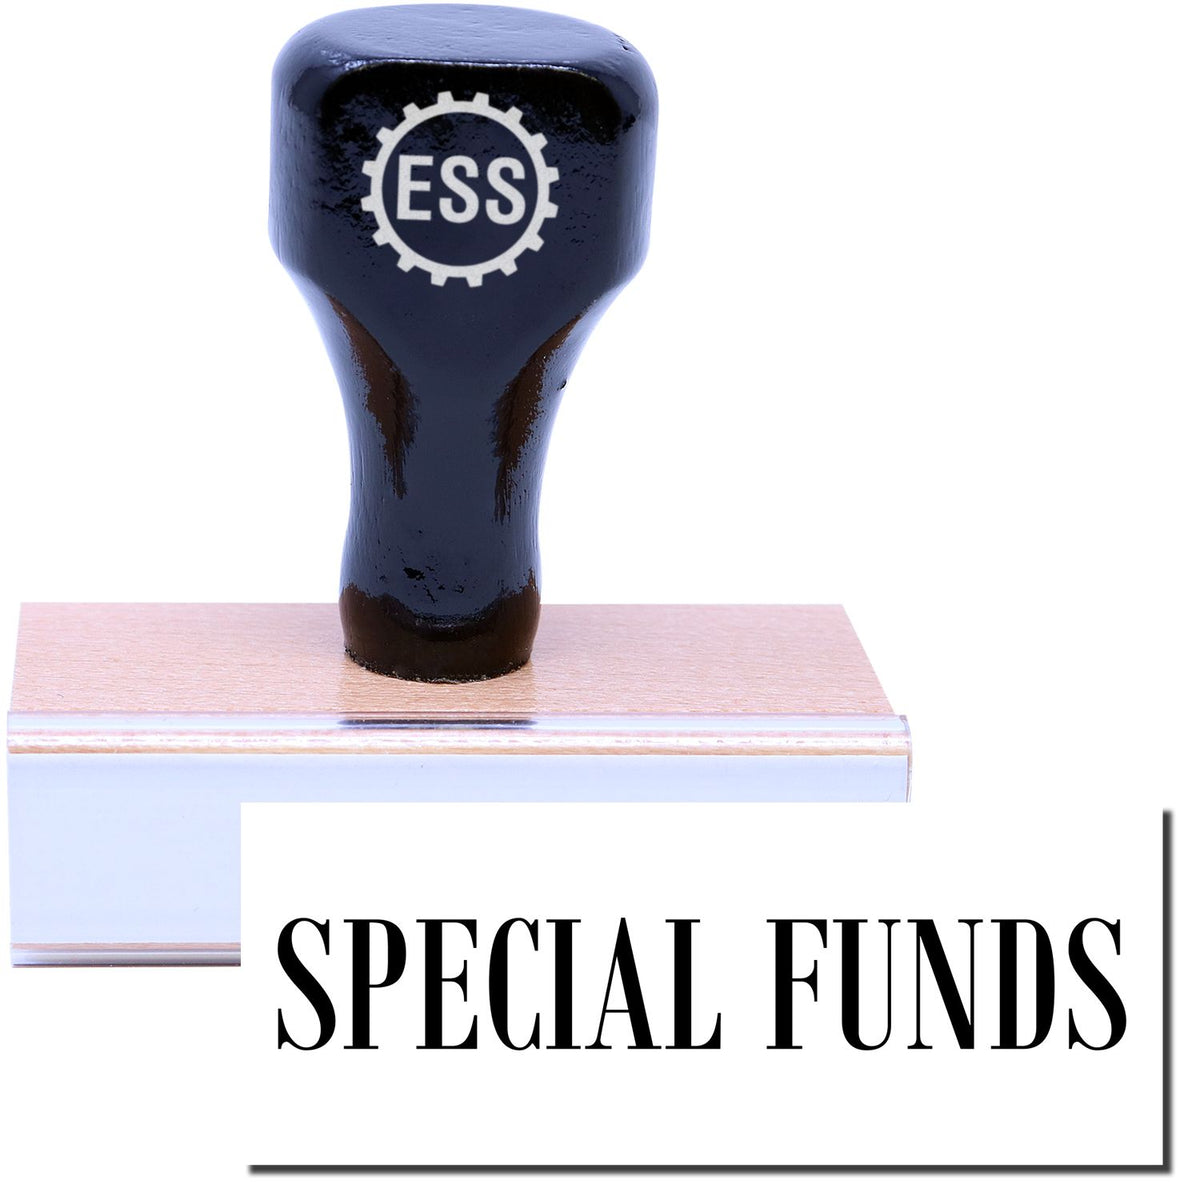 A stock office rubber stamp with a stamped image showing how the text &quot;SPECIAL FUNDS&quot; in a large font is displayed after stamping.